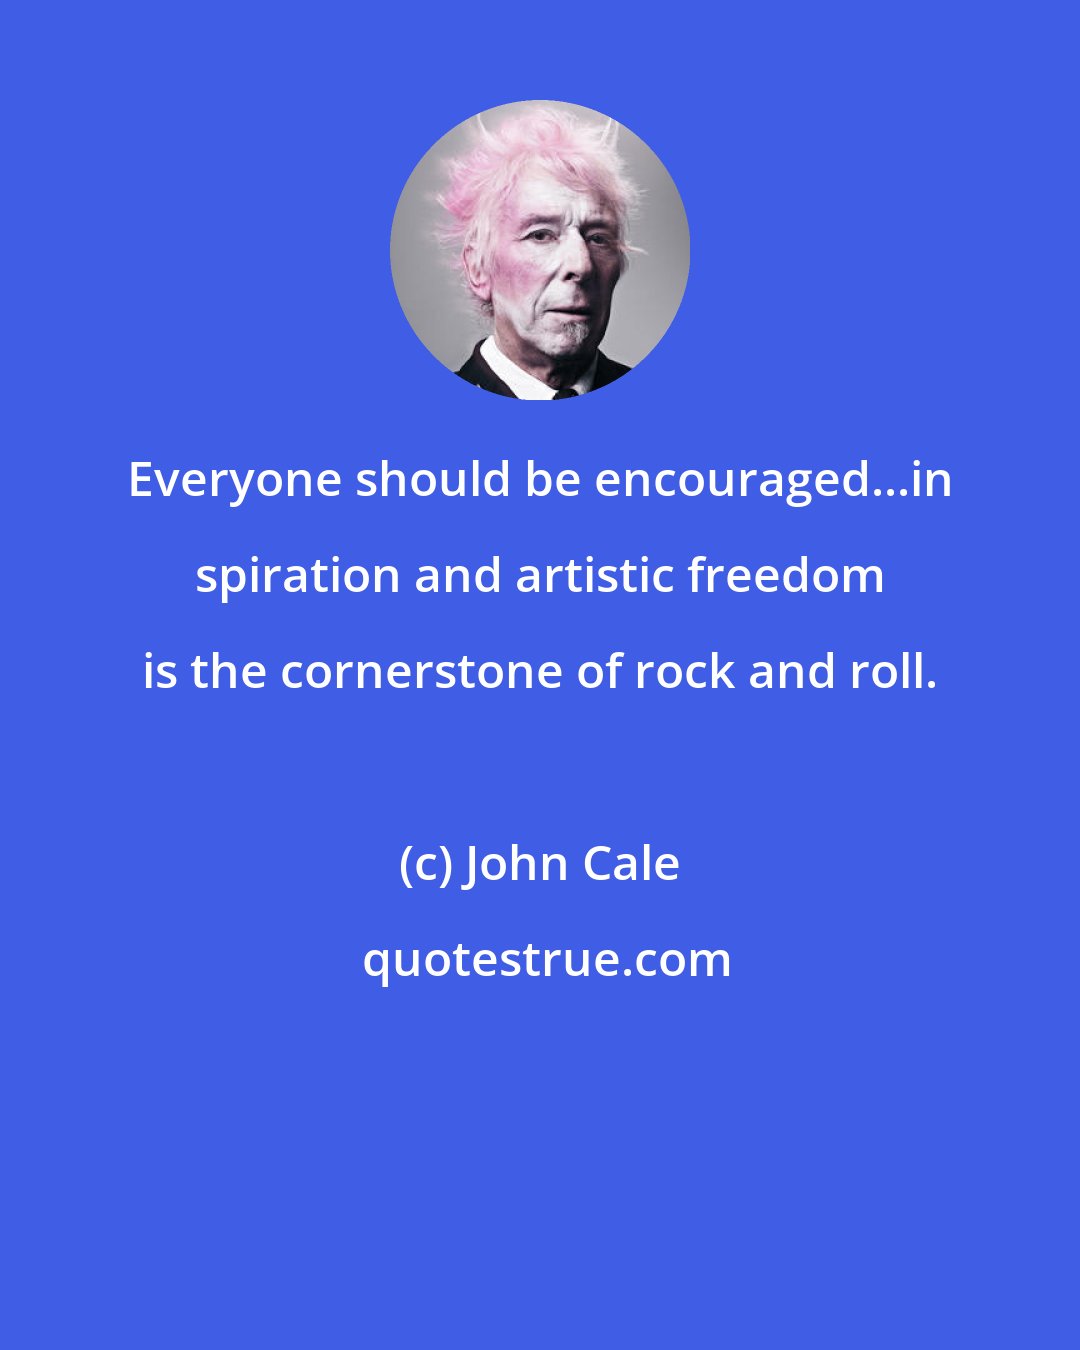 John Cale: Everyone should be encouraged...in spiration and artistic freedom is the cornerstone of rock and roll.